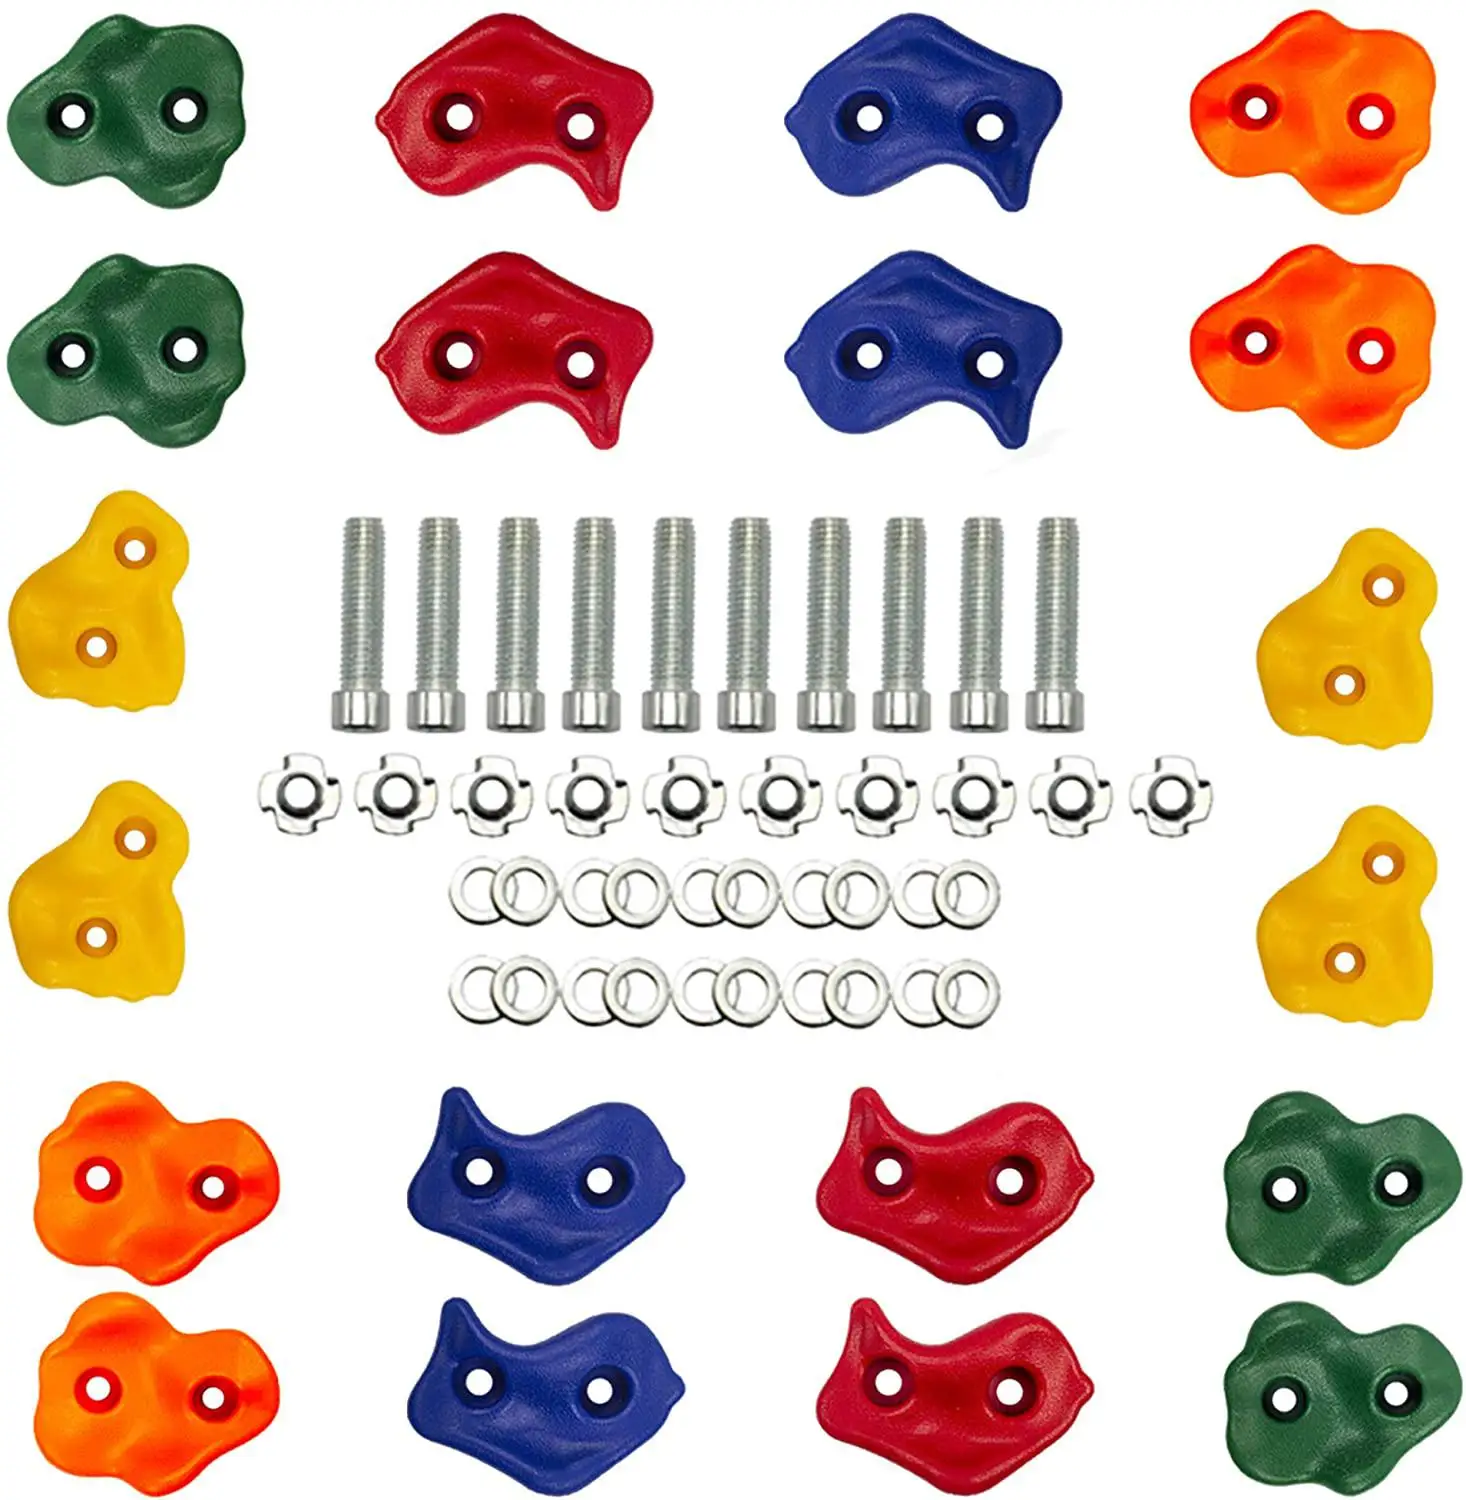 KINSPORY 10Pc Pig Nose Shape Rock Climbing Holds with Two Handles for Indoor & Outdoor Play Set M1040 Hardware Kit Included 